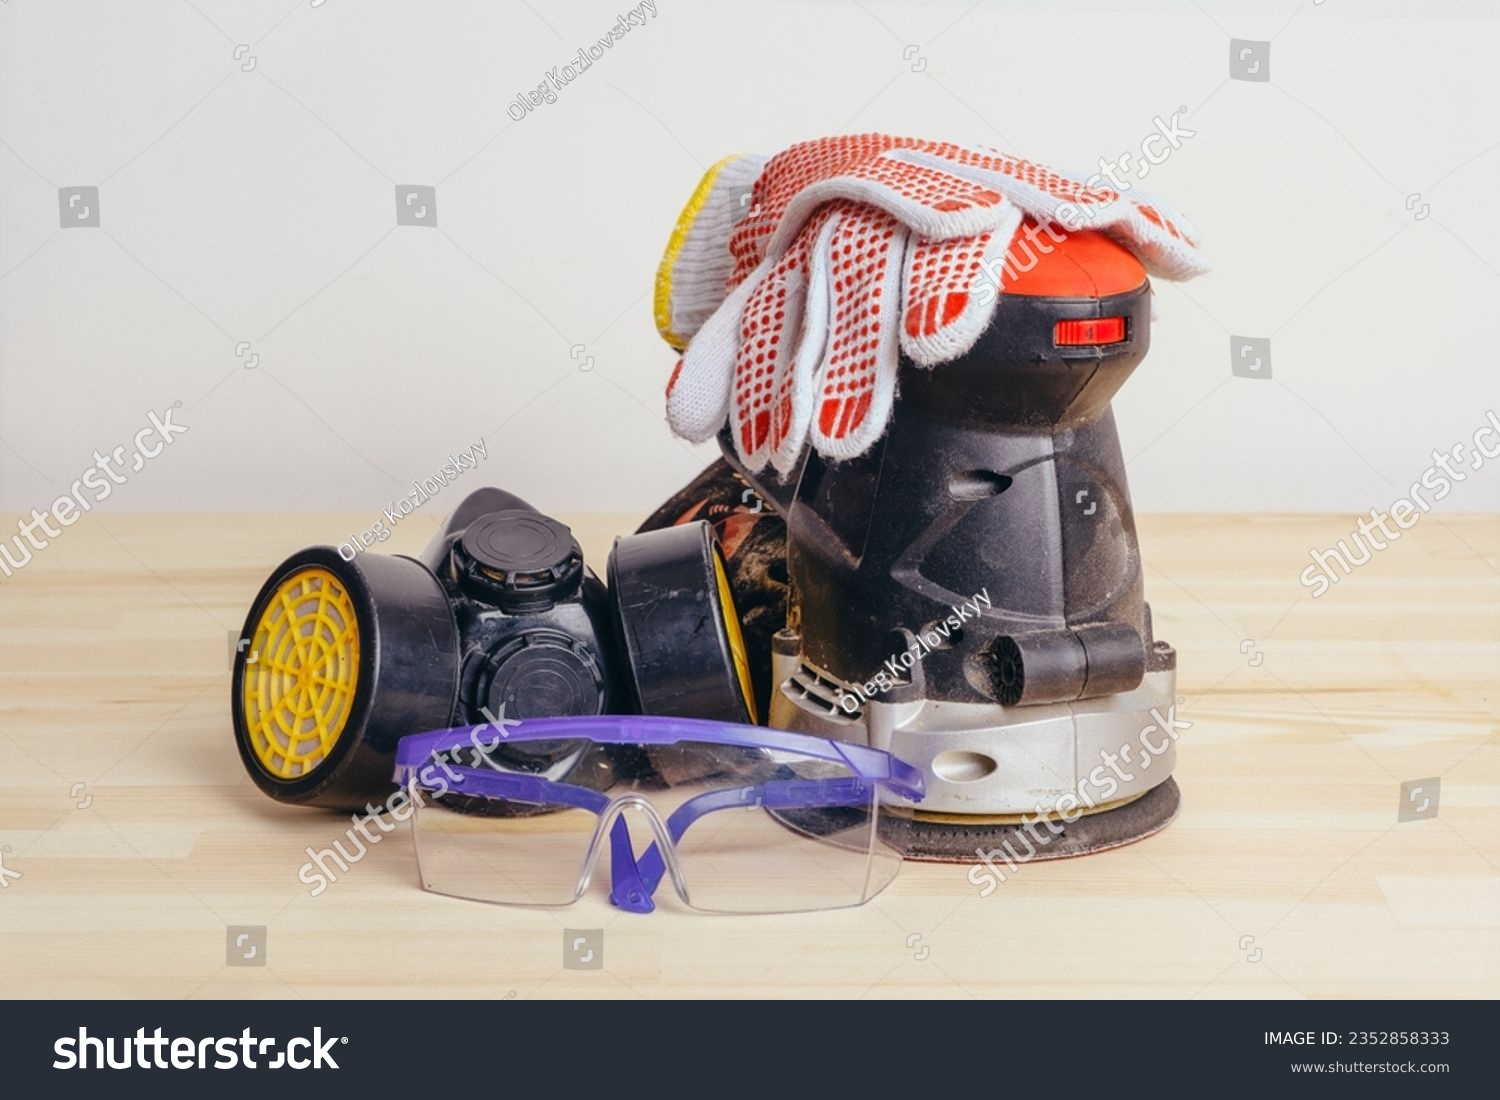 Grinding machine, gloves, goggles and a protective mask on a wooden table against a white wall. #2352858333